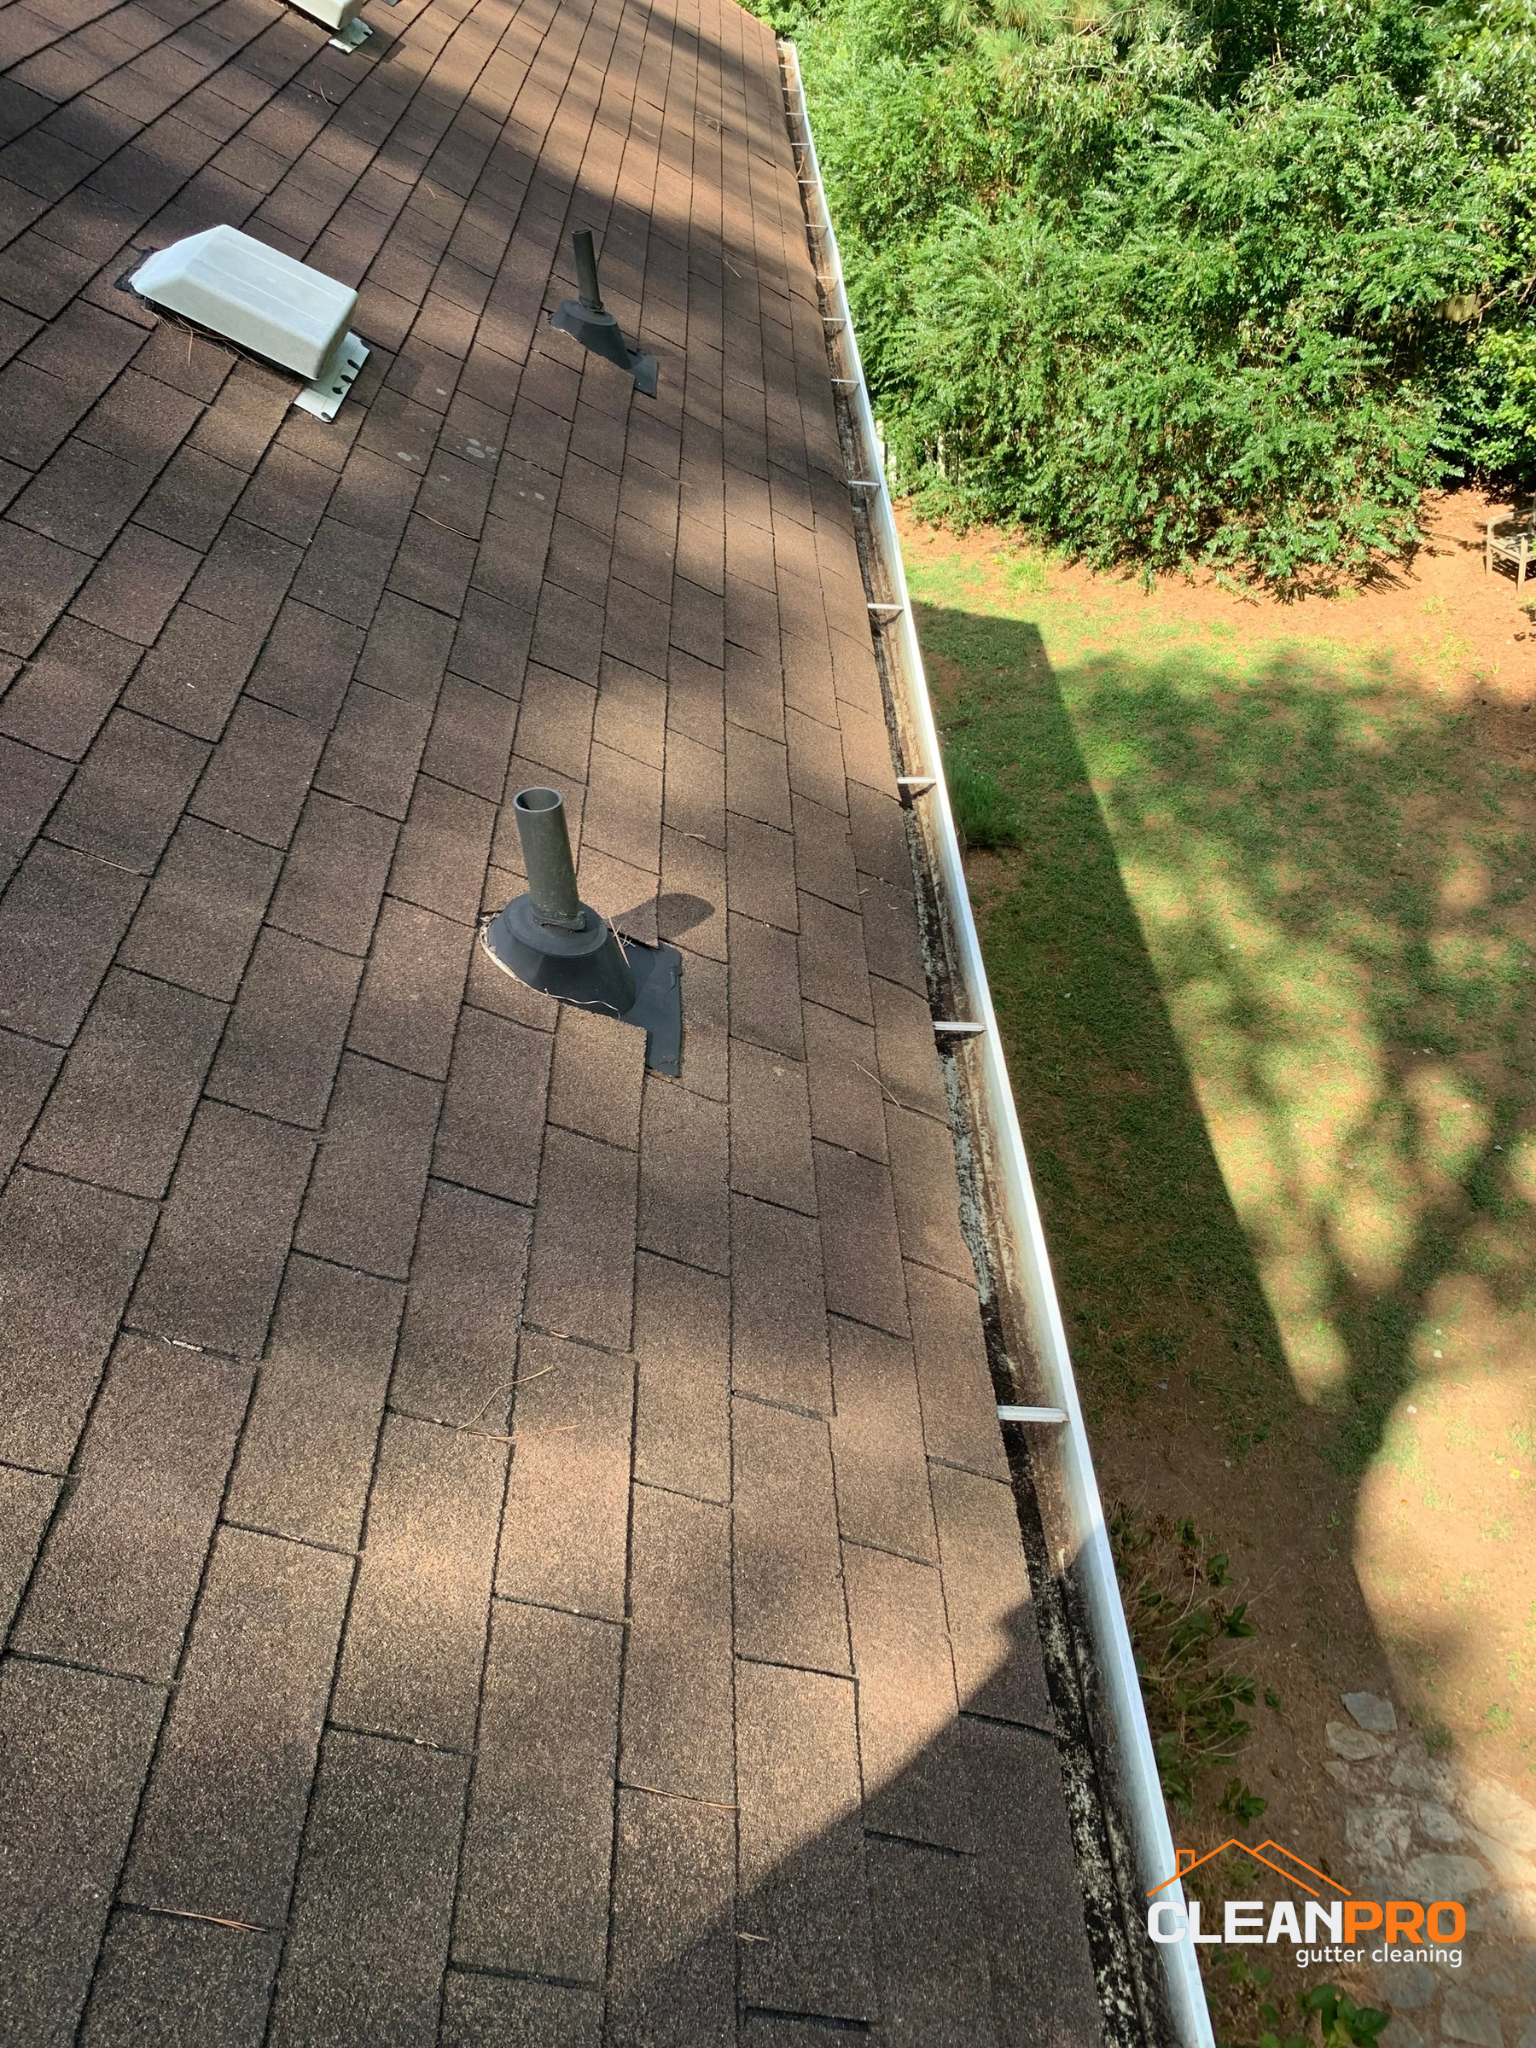 Local Gutter Cleaning in Beaverton